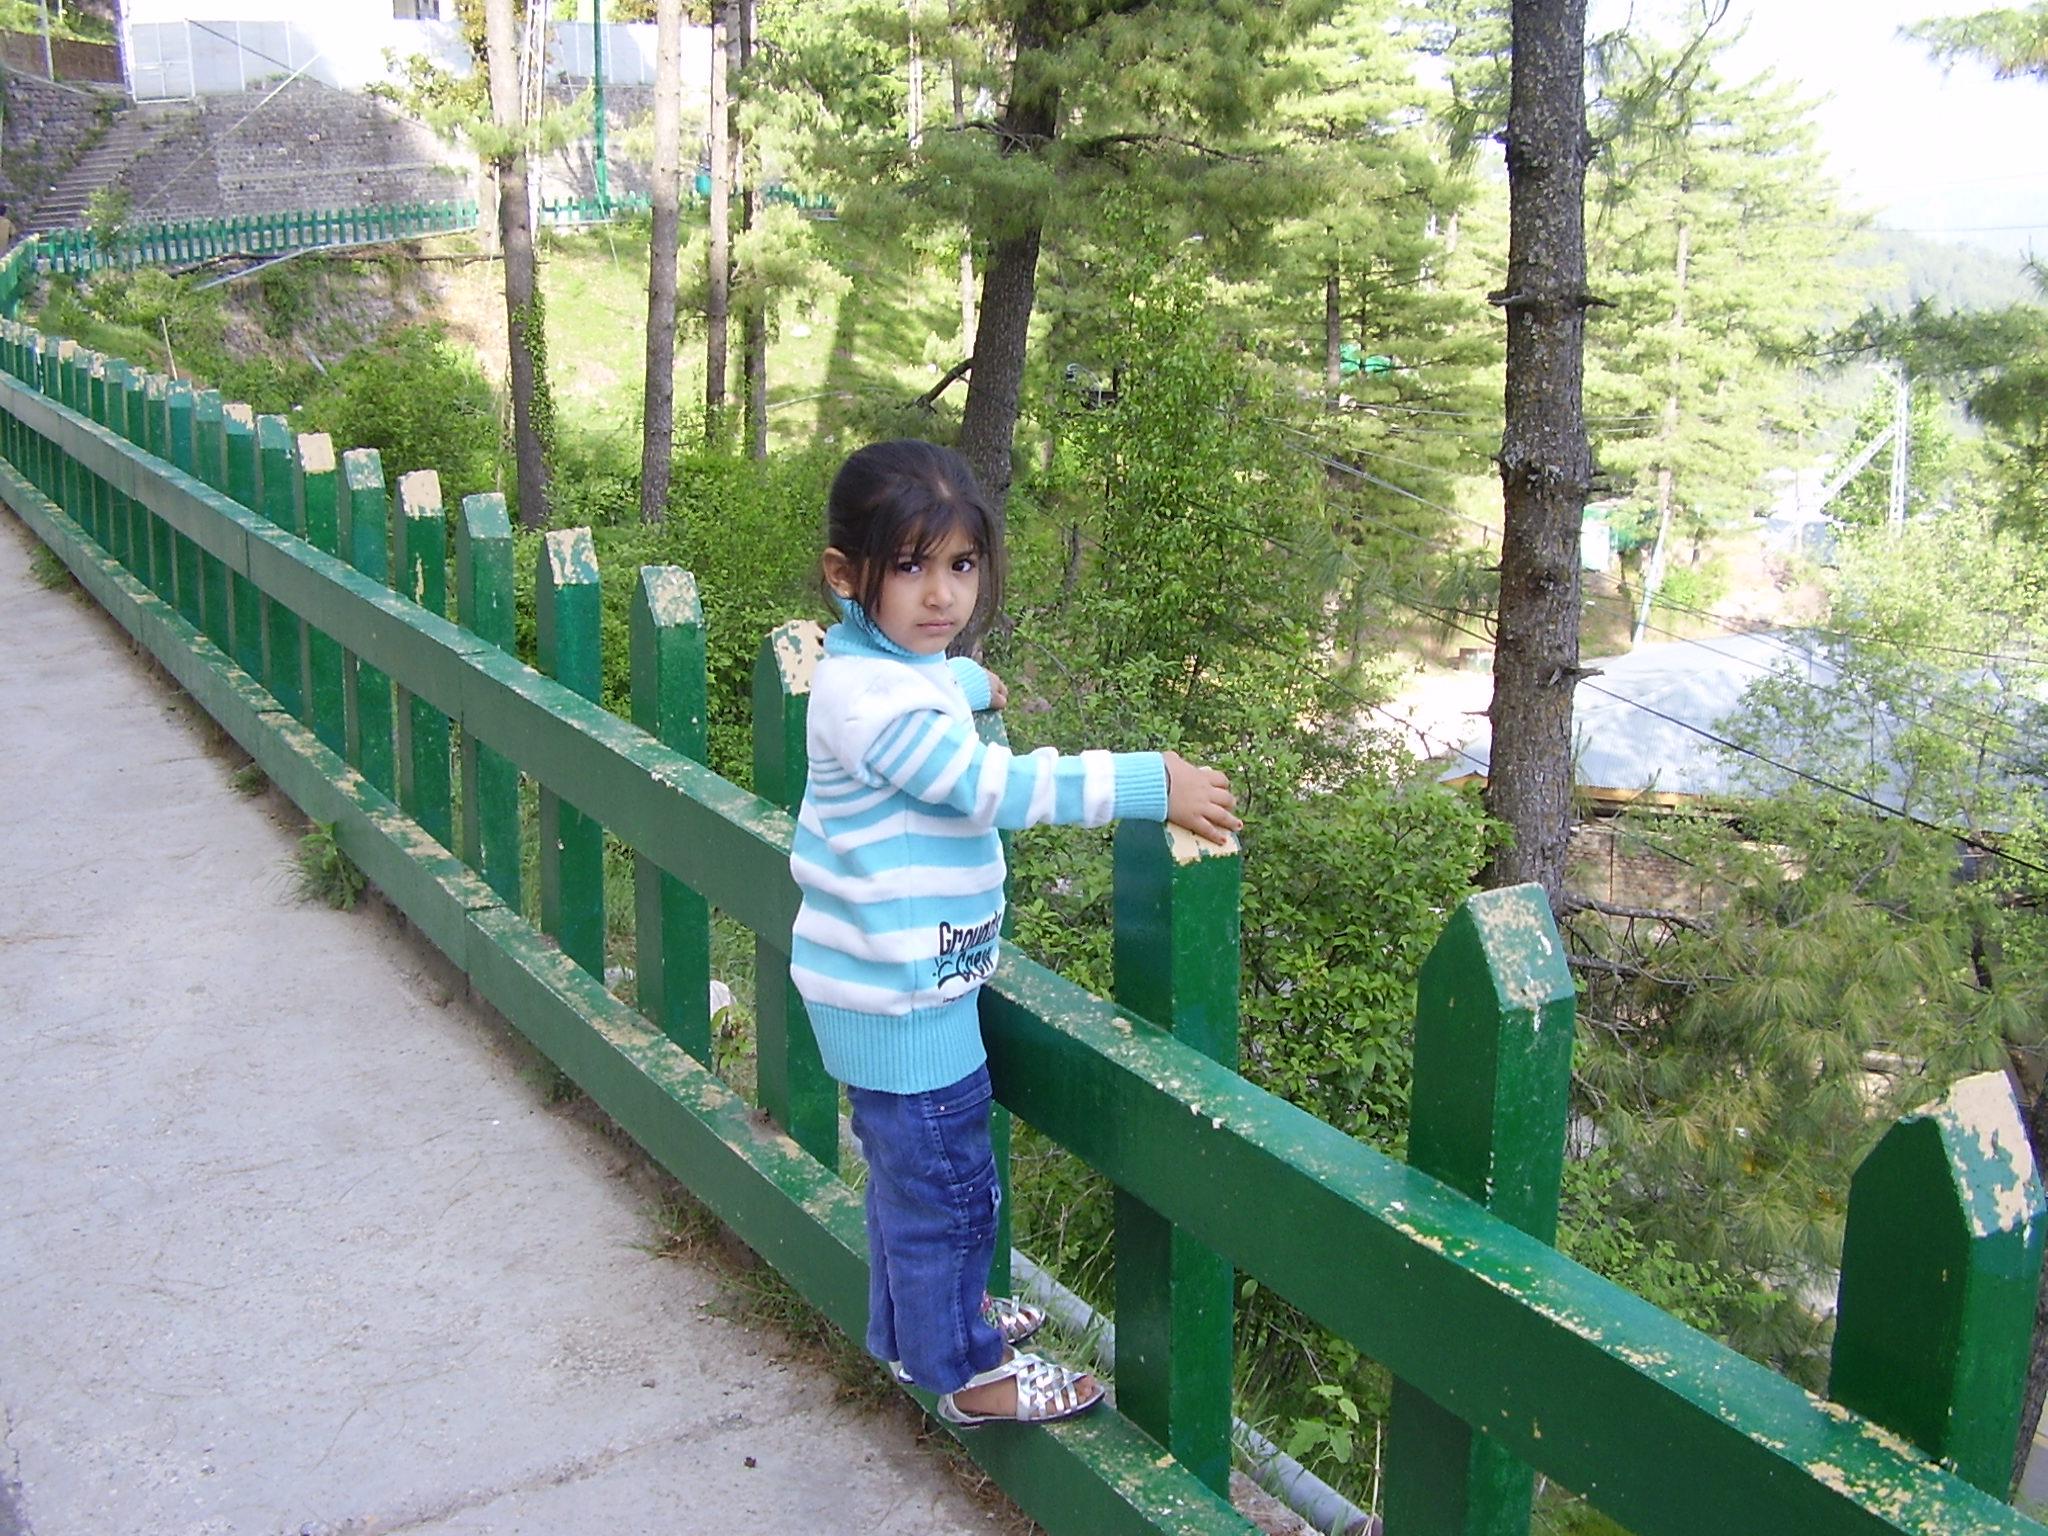 Things to do for children in their Kashmir Vacation